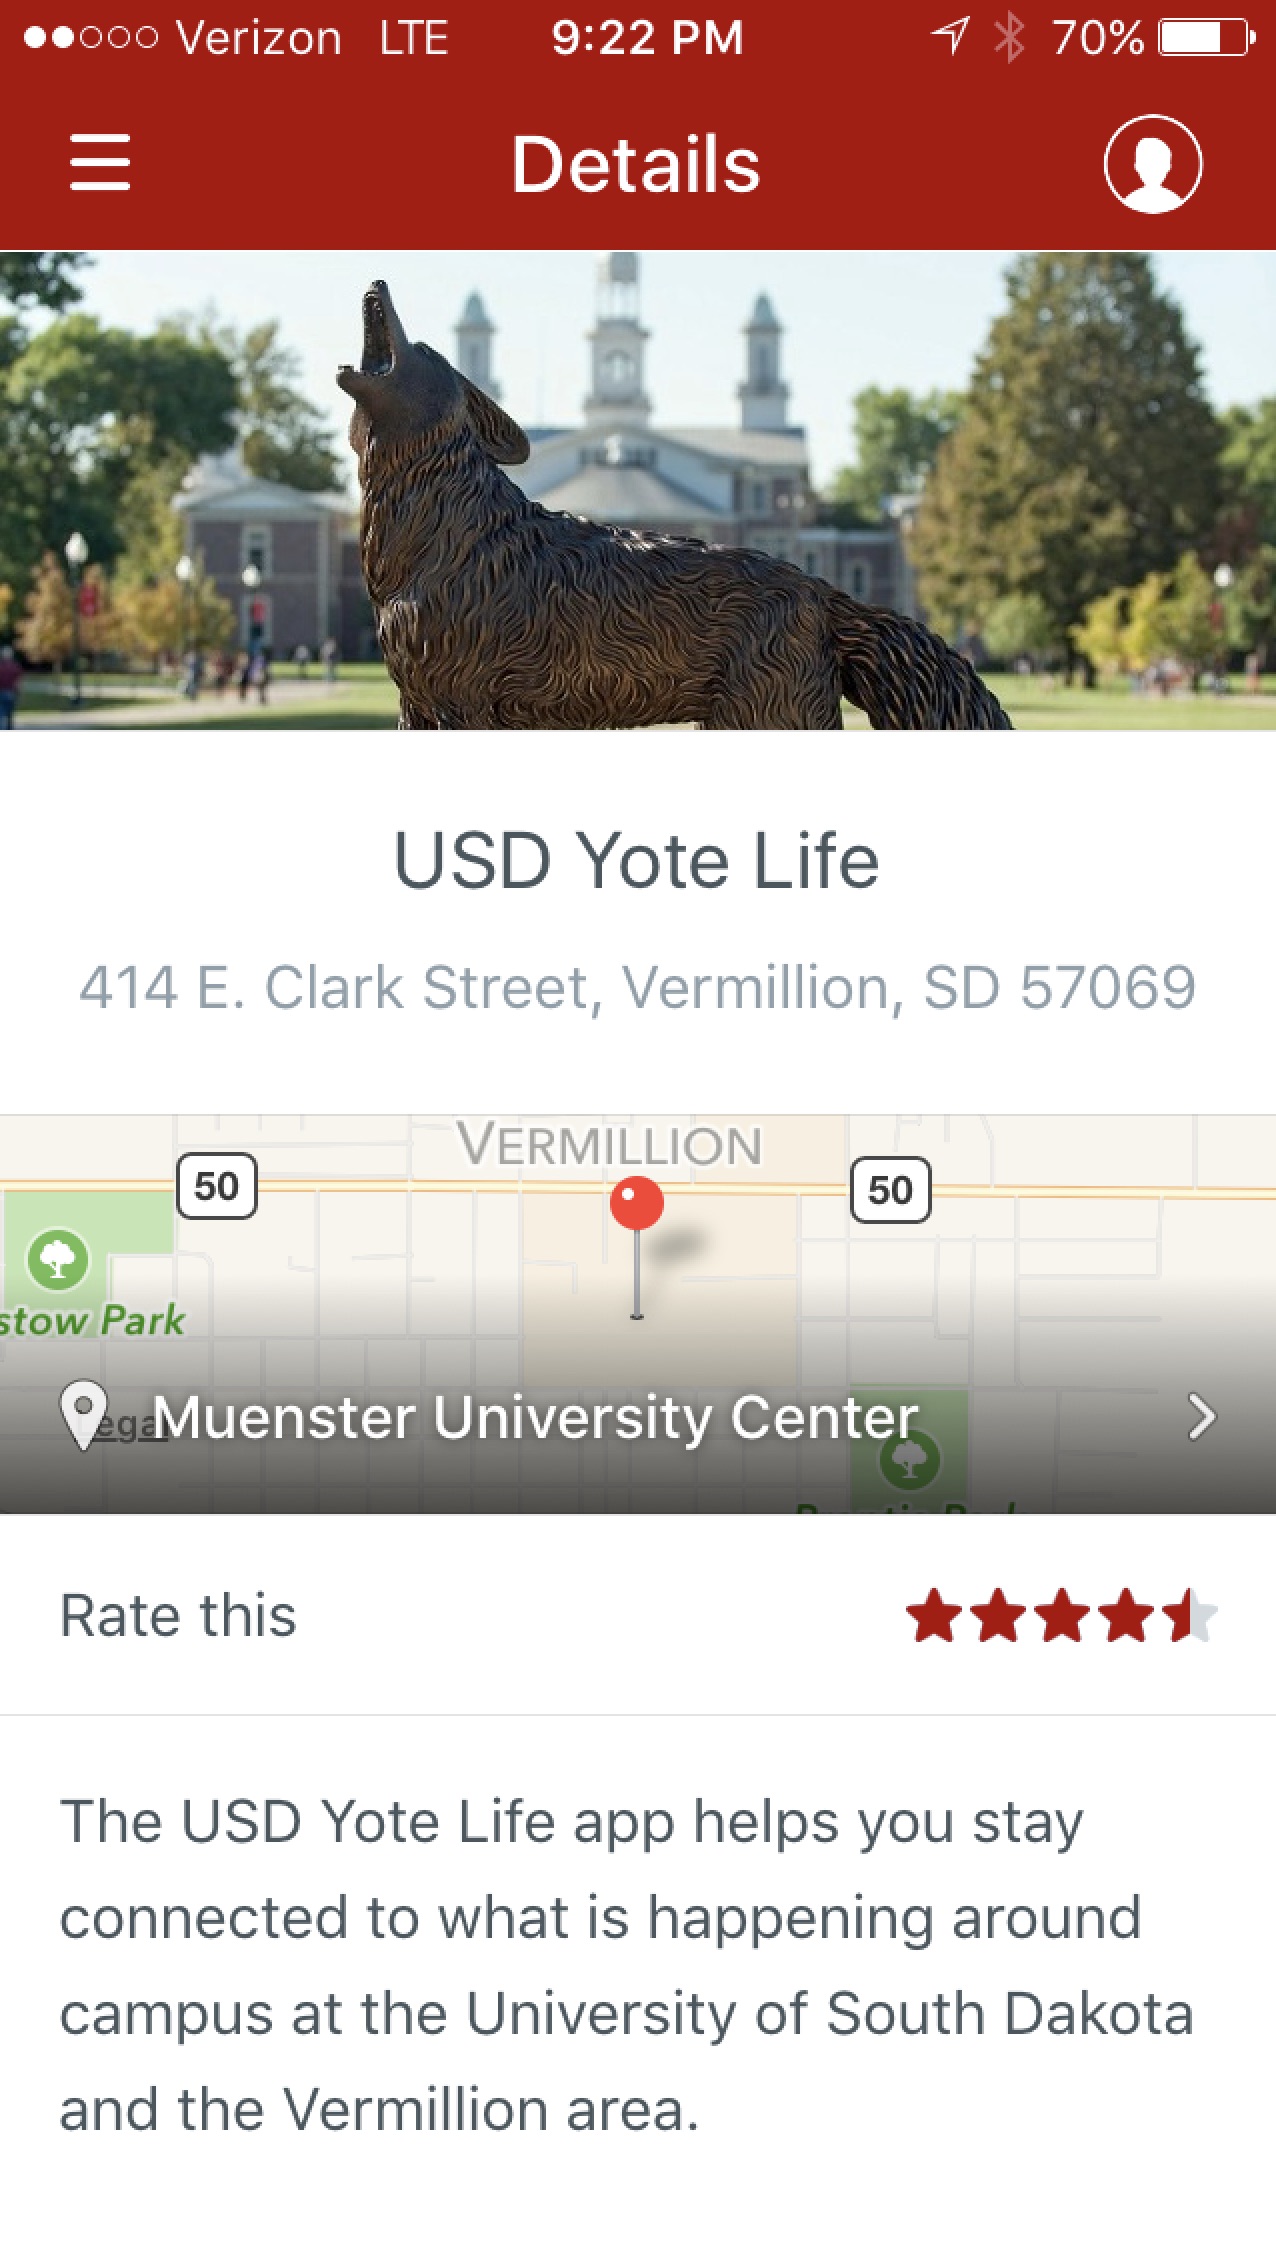 Living the Yote Life: New app connects students to campus events